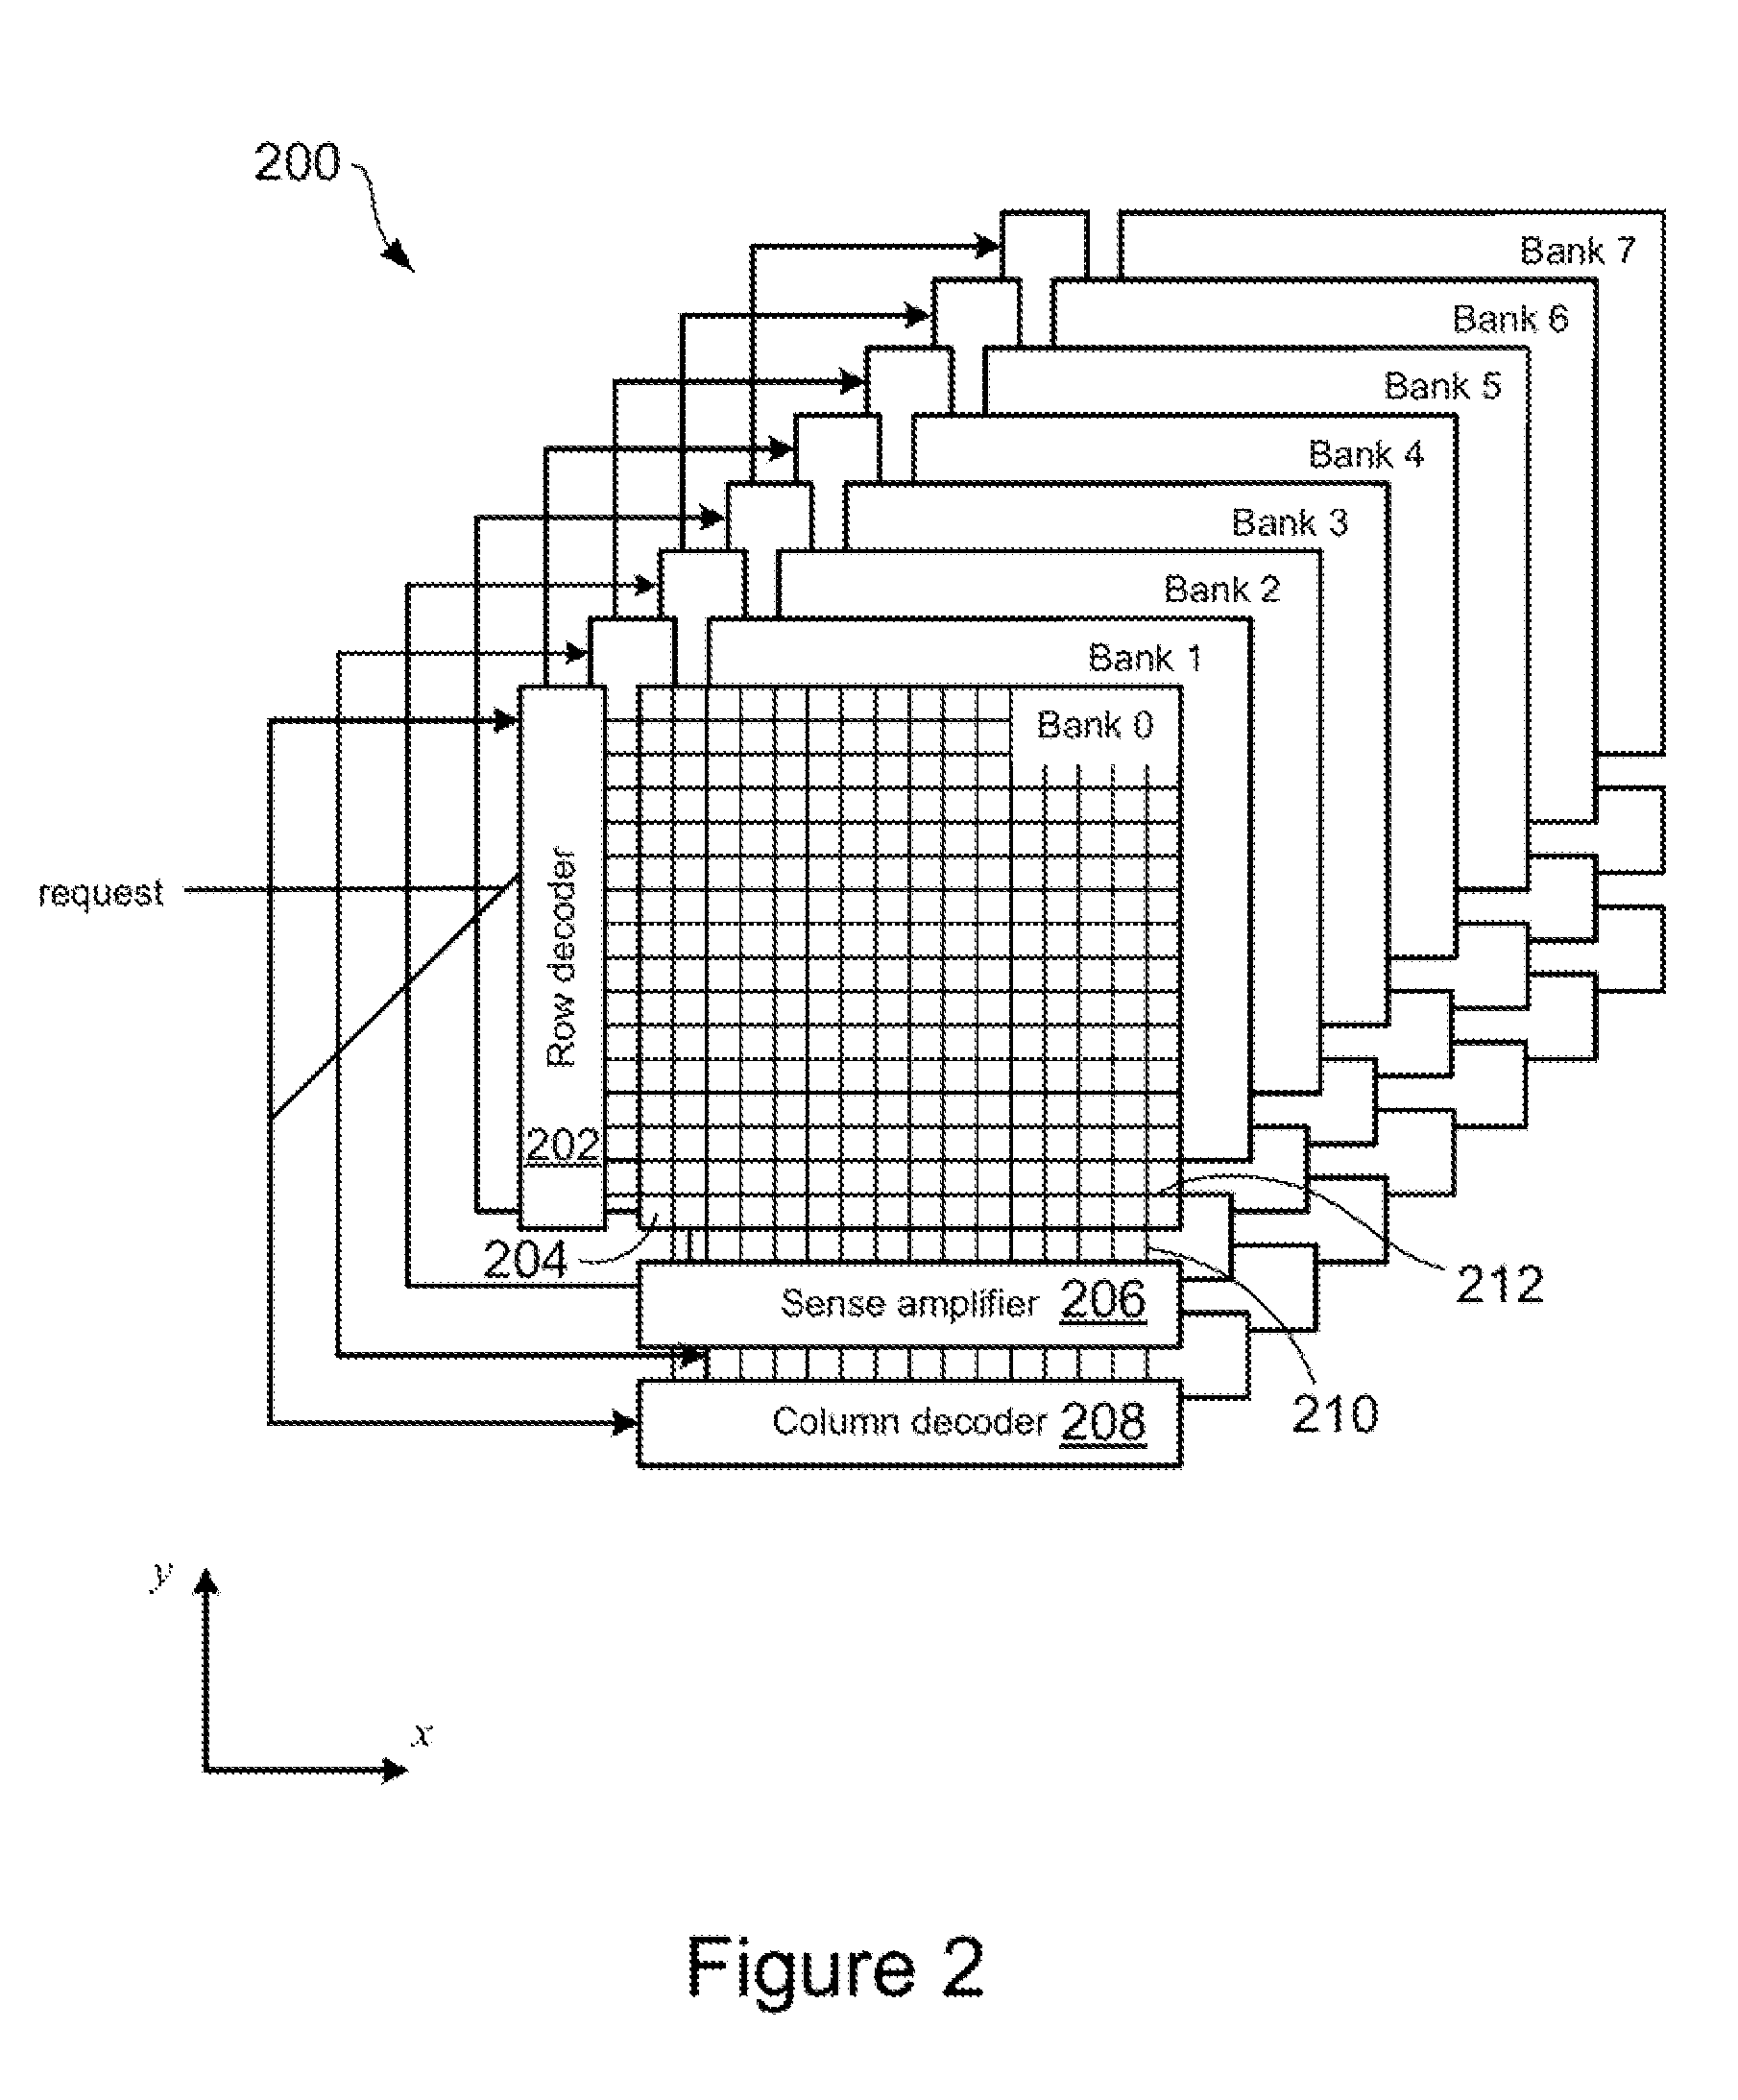 Independently Controllable And Reconfigurable Virtual Memory Devices In Memory Modules That Are Pin-compatible With Standard Memory Modules